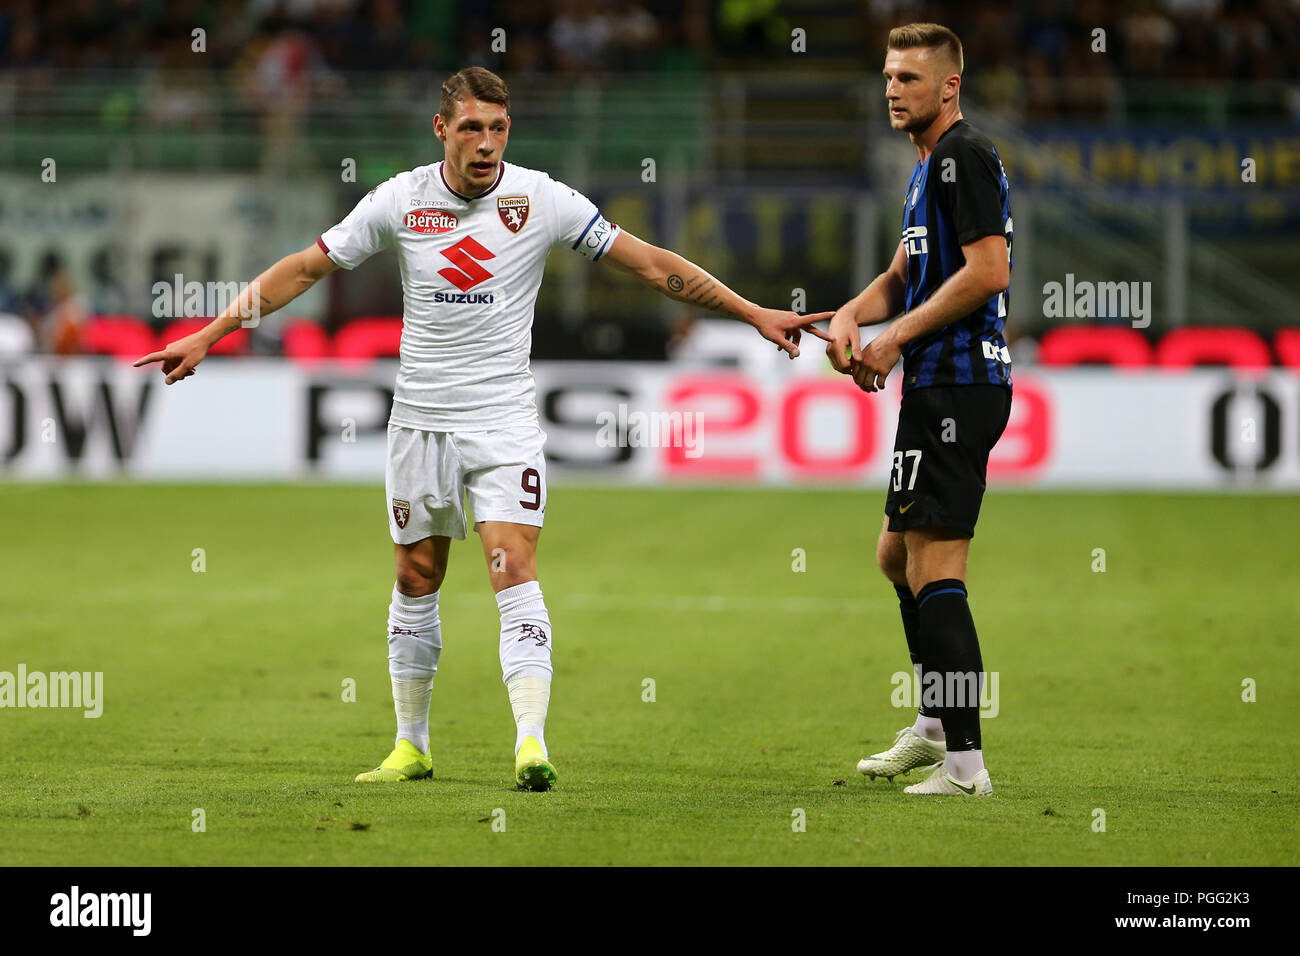 Milan, Italy. 26th August, 2018.  Andrea Belotti of Torino FC in action   during the Serie A football match between FC Internazionale and Torino Fc. Credit: Marco Canoniero/Alamy Live News Stock Photo